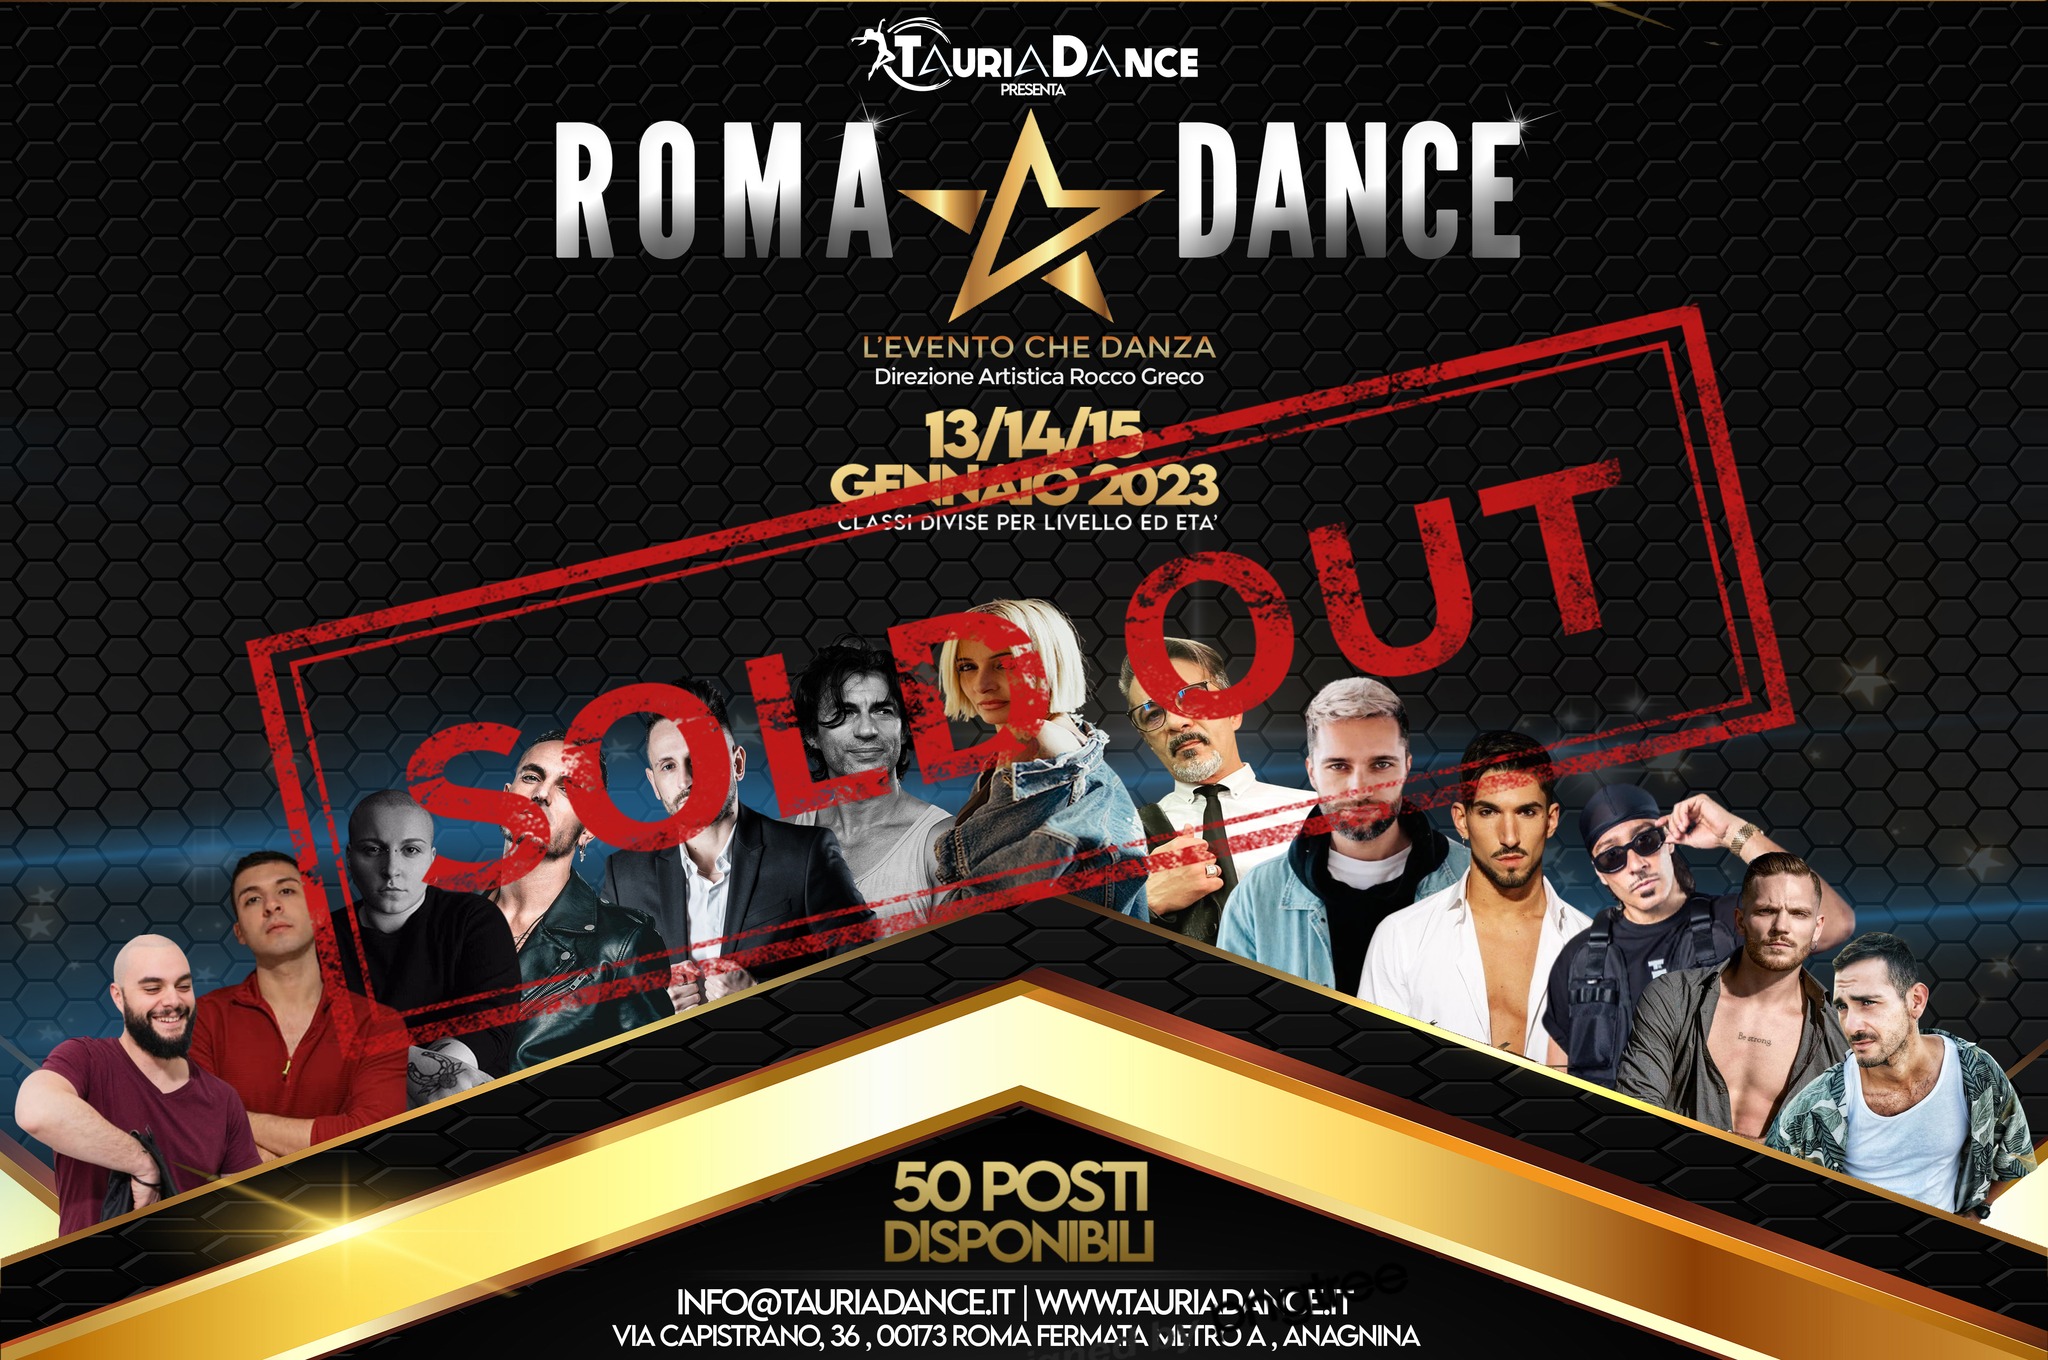 ROMA DANCE 2023 sold out